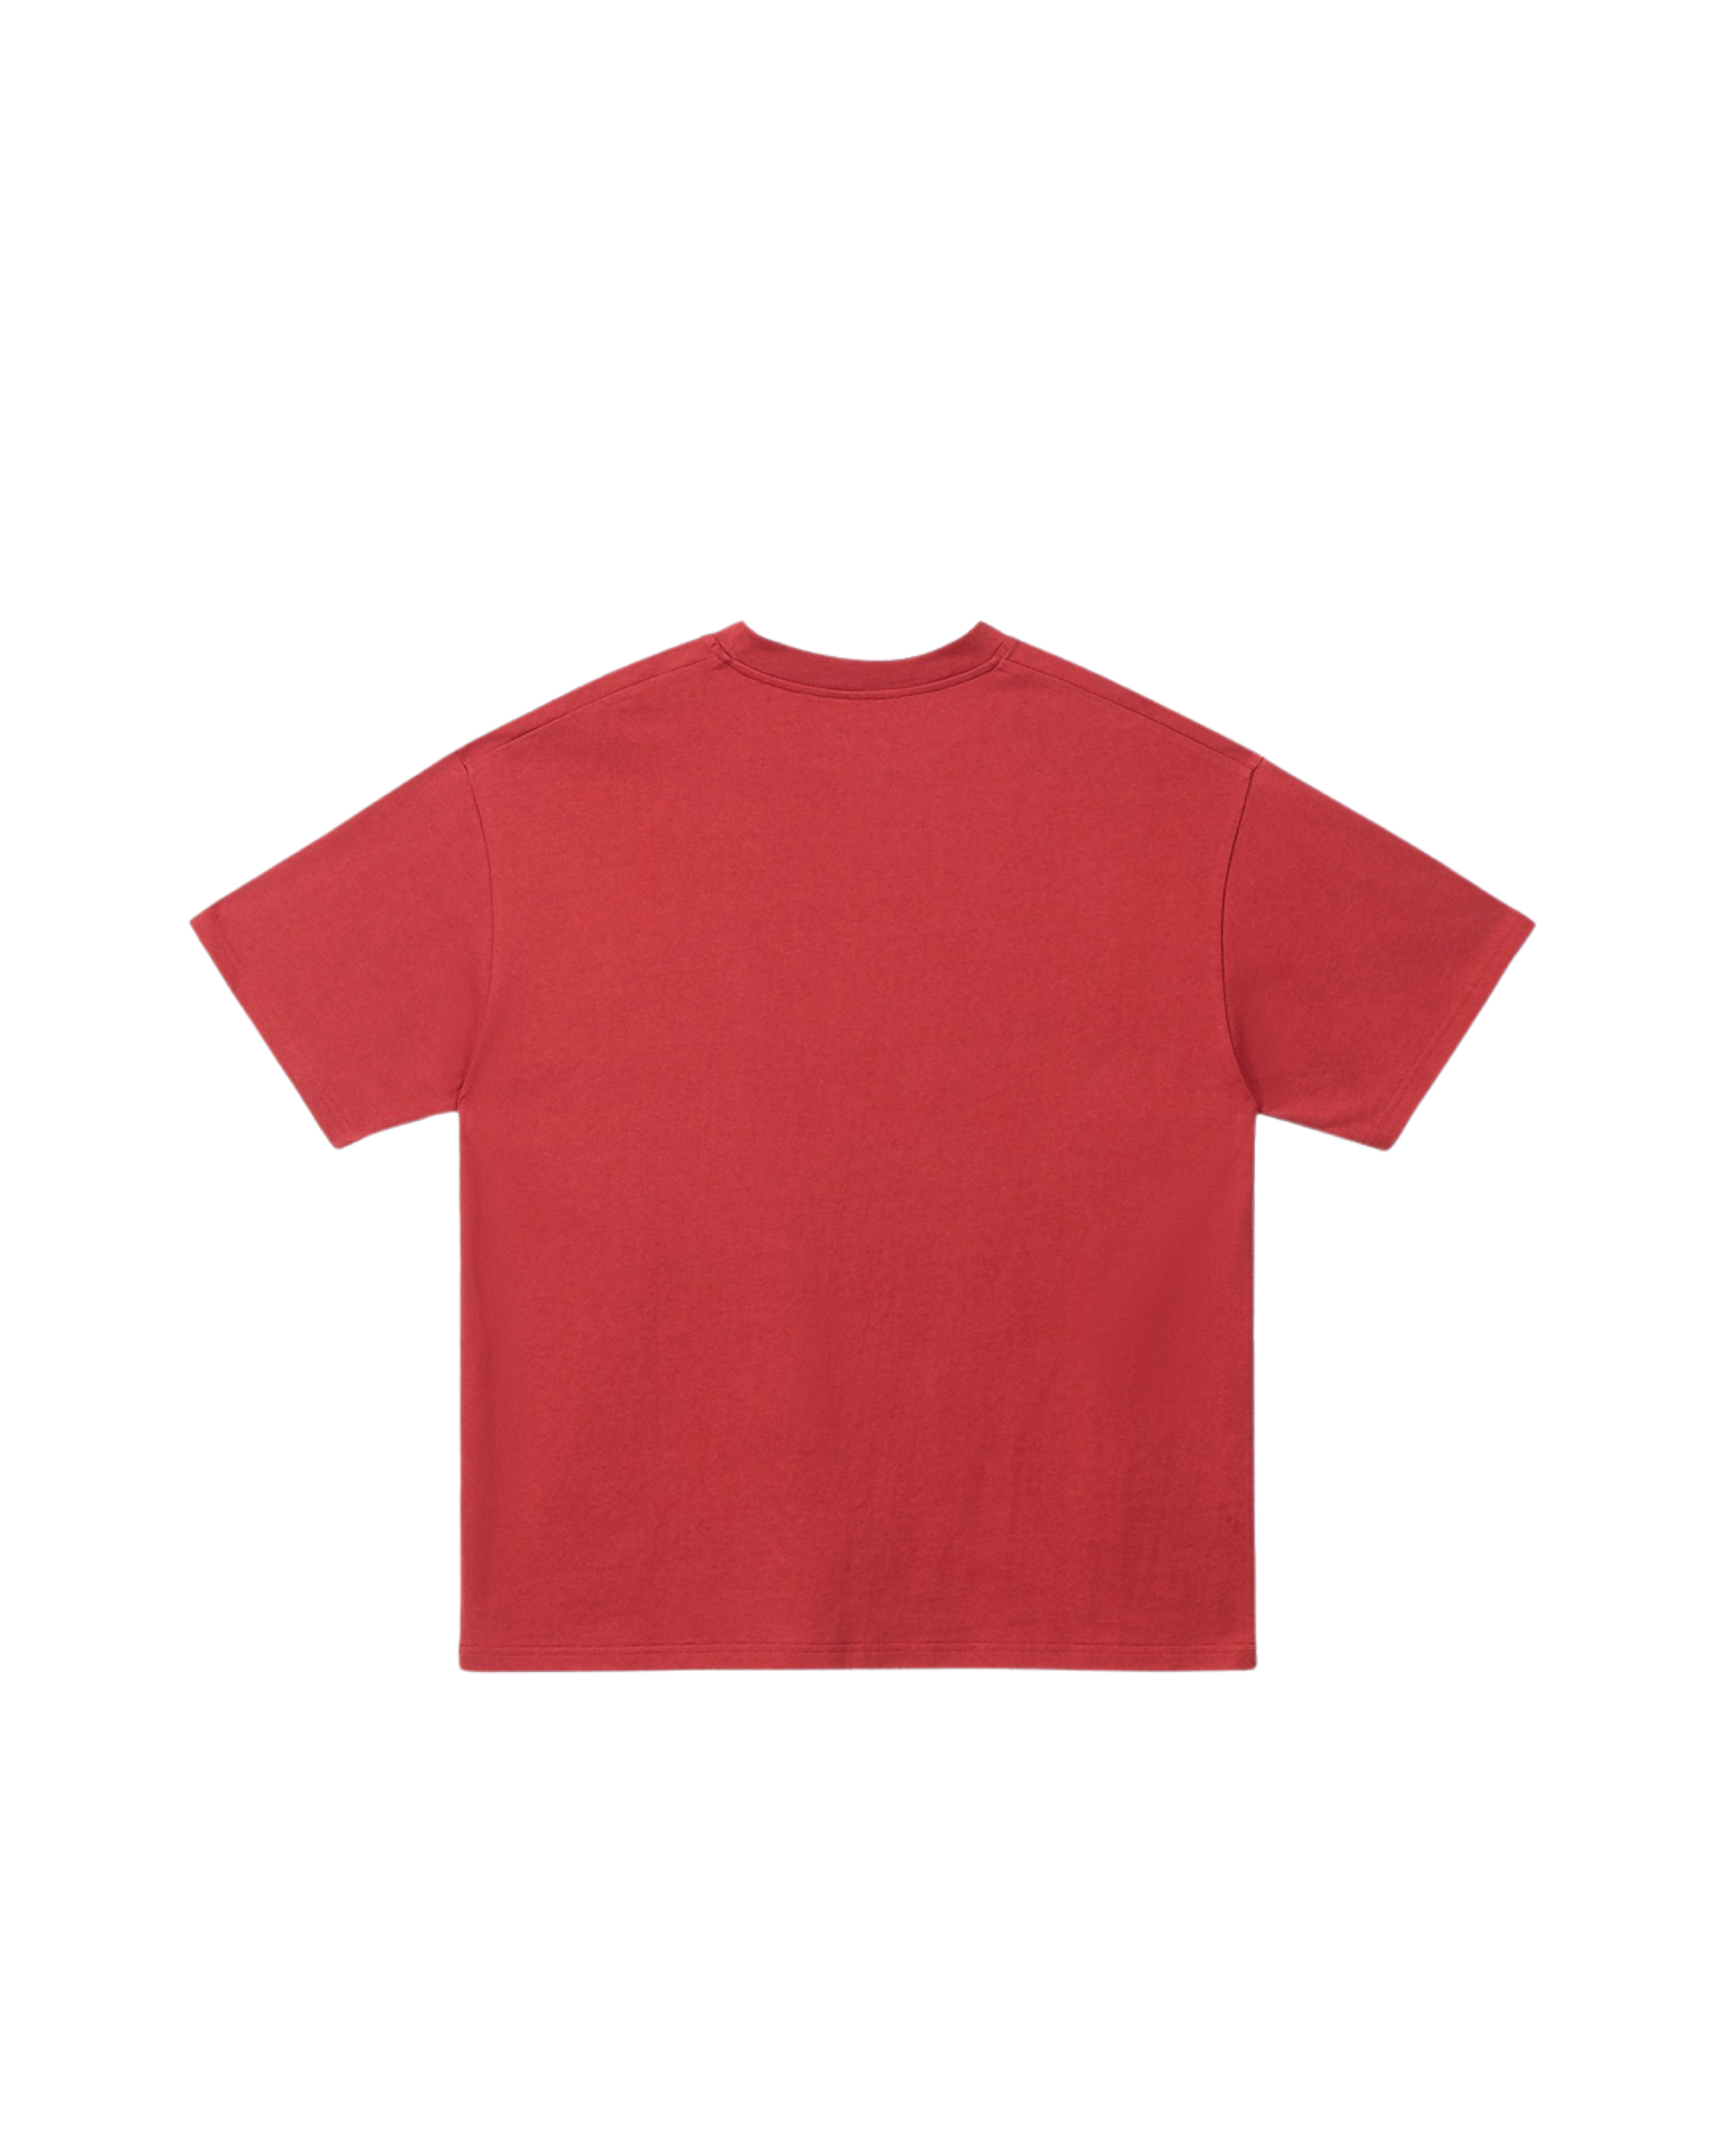 Summer Classic T-shirt in Rusty Red